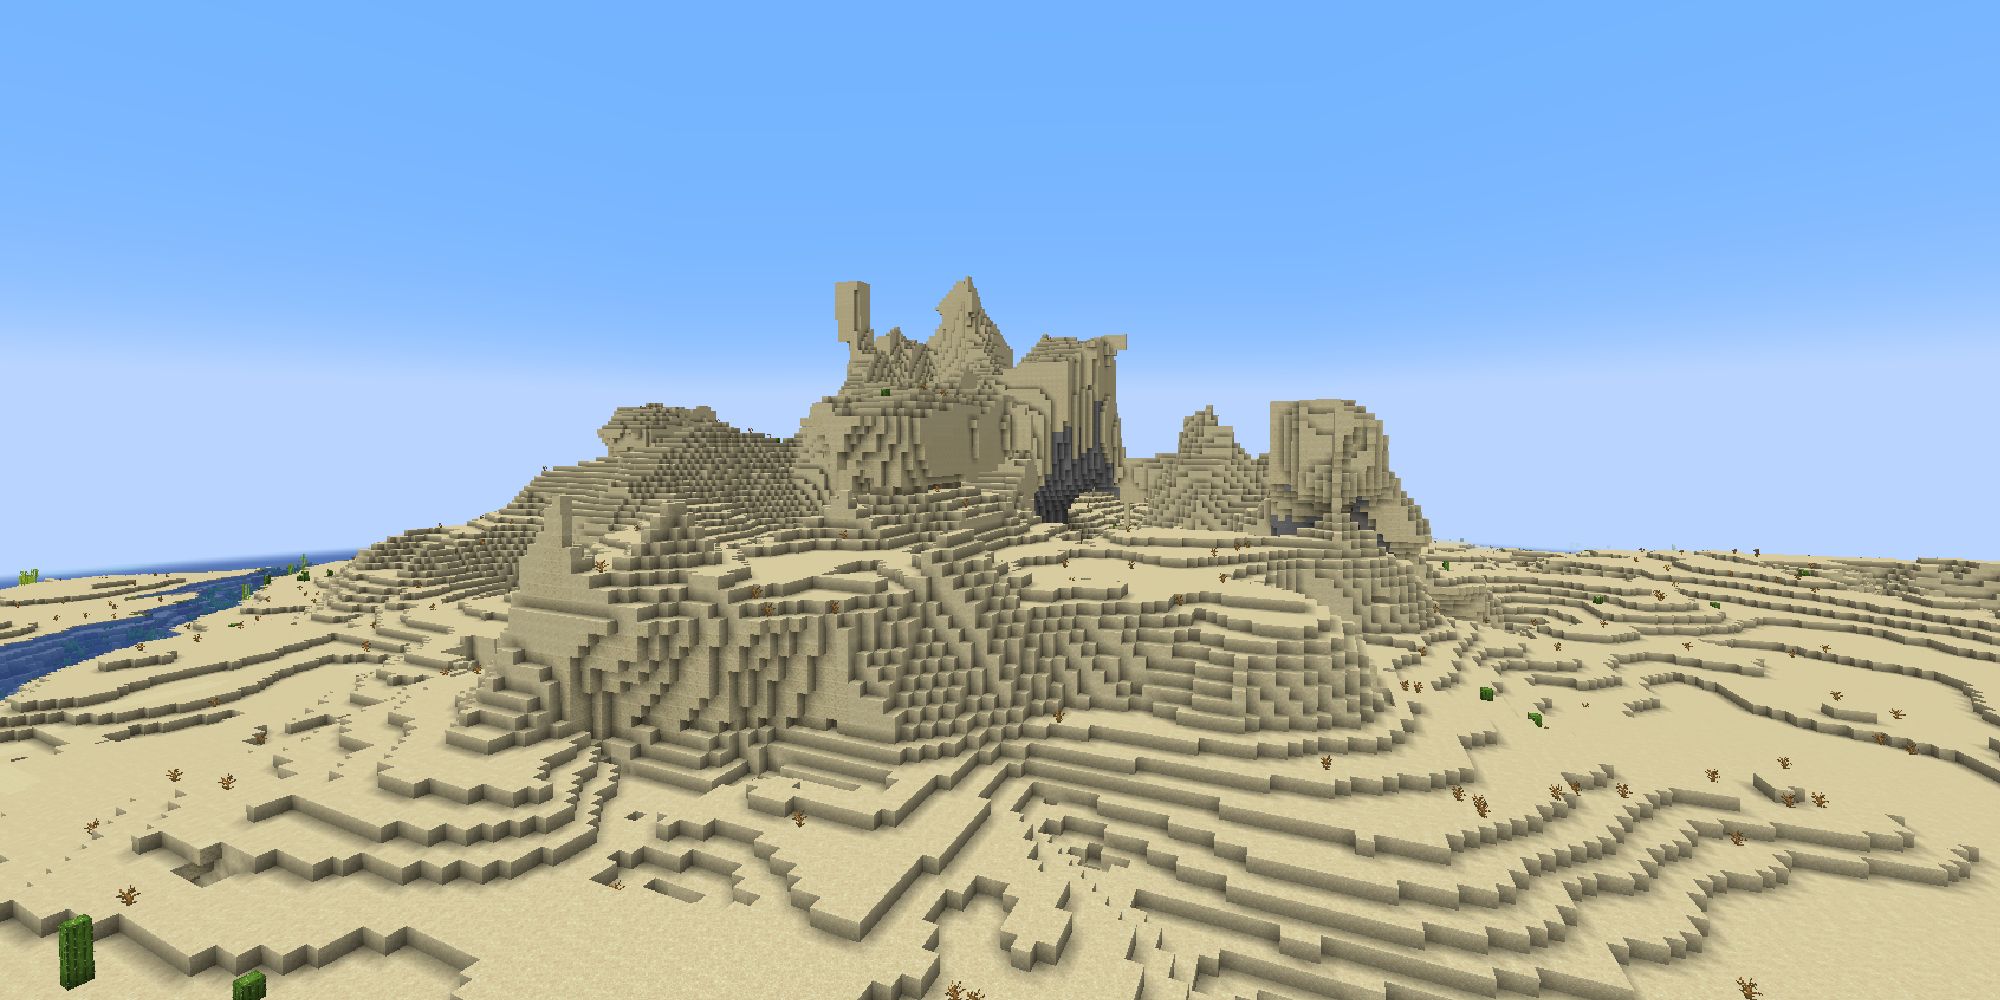 desert biome from above